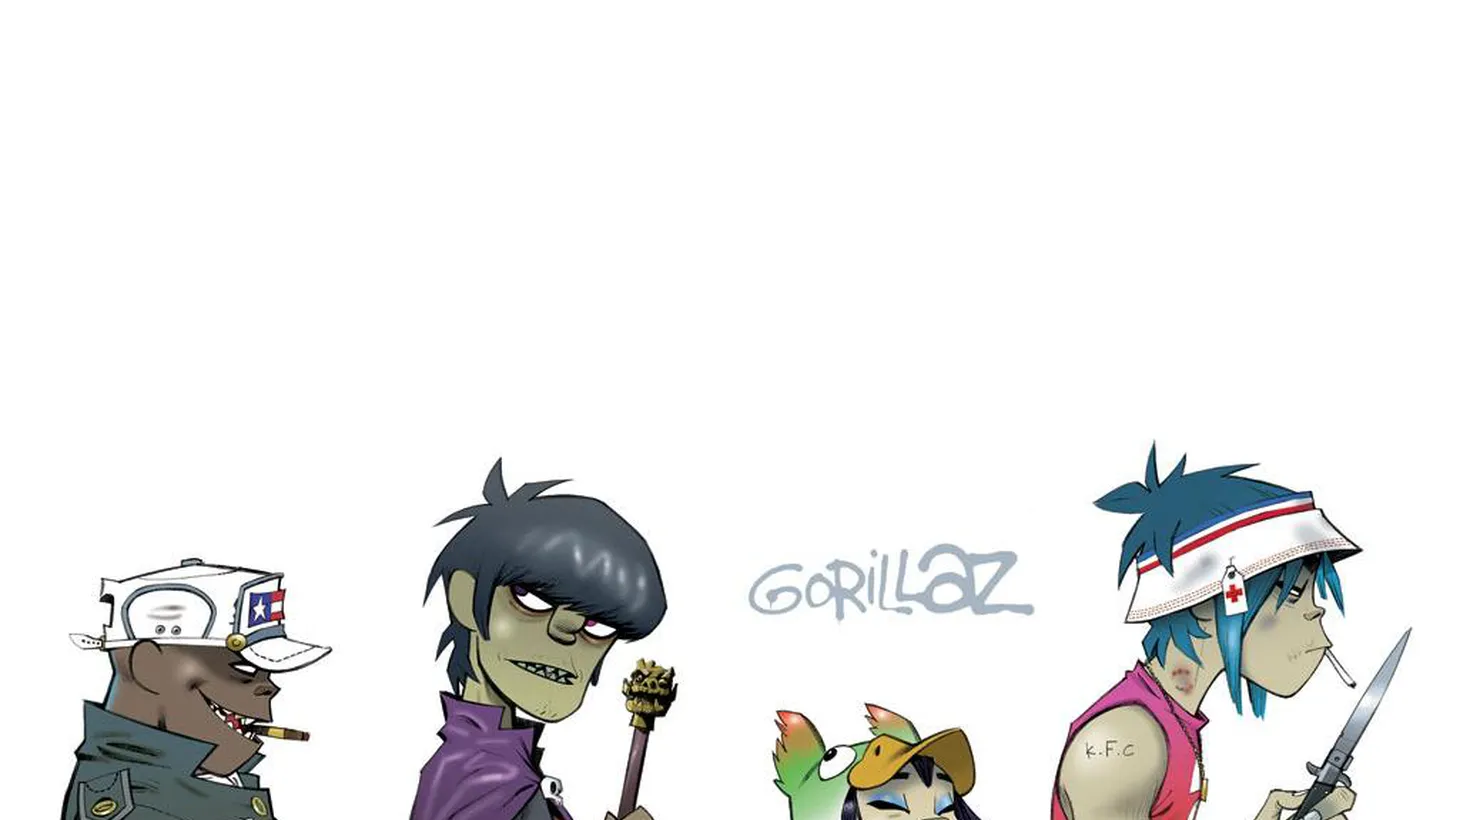 Gorillaz are a fictional band of cartoon characters created by Blur's Damon Albarn and Jamie Hewitt. They may be the world's most successful virtual band, but we'll host them in real life for a live performance and a chat with Jason Bentley on Morning Becomes Eclectic at 11:15am.